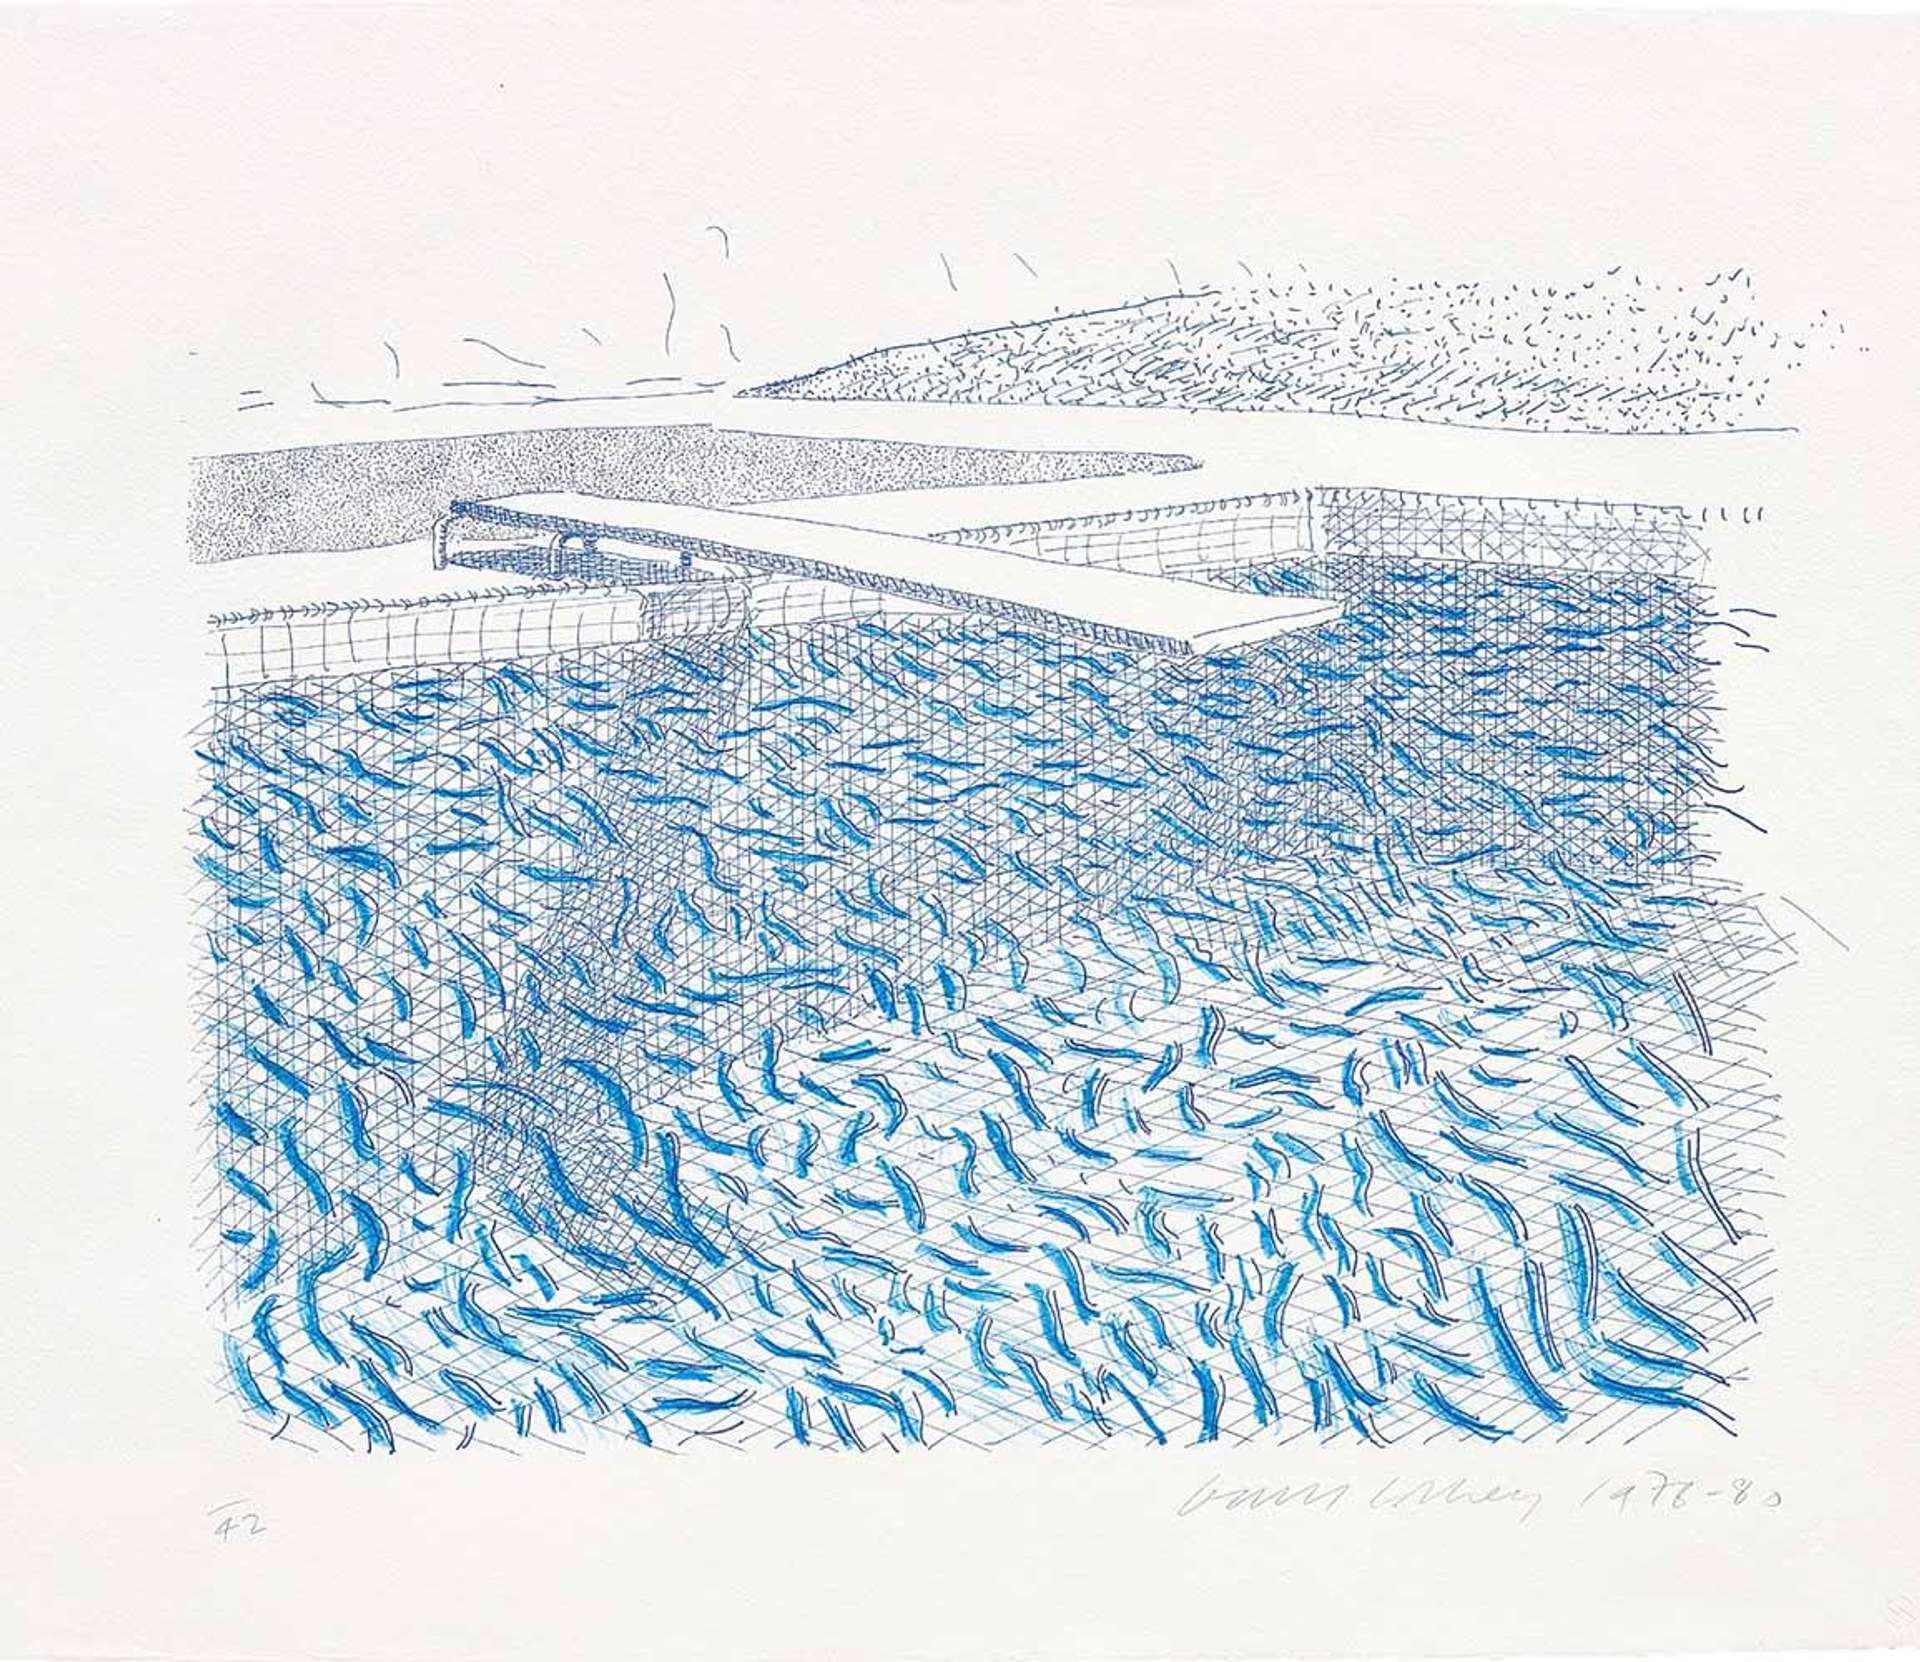 An image of a pool, etched by David Hockney. It is a flat-looking image, that shows small blue squiggles representing waves, against a white background eched in fine lines.